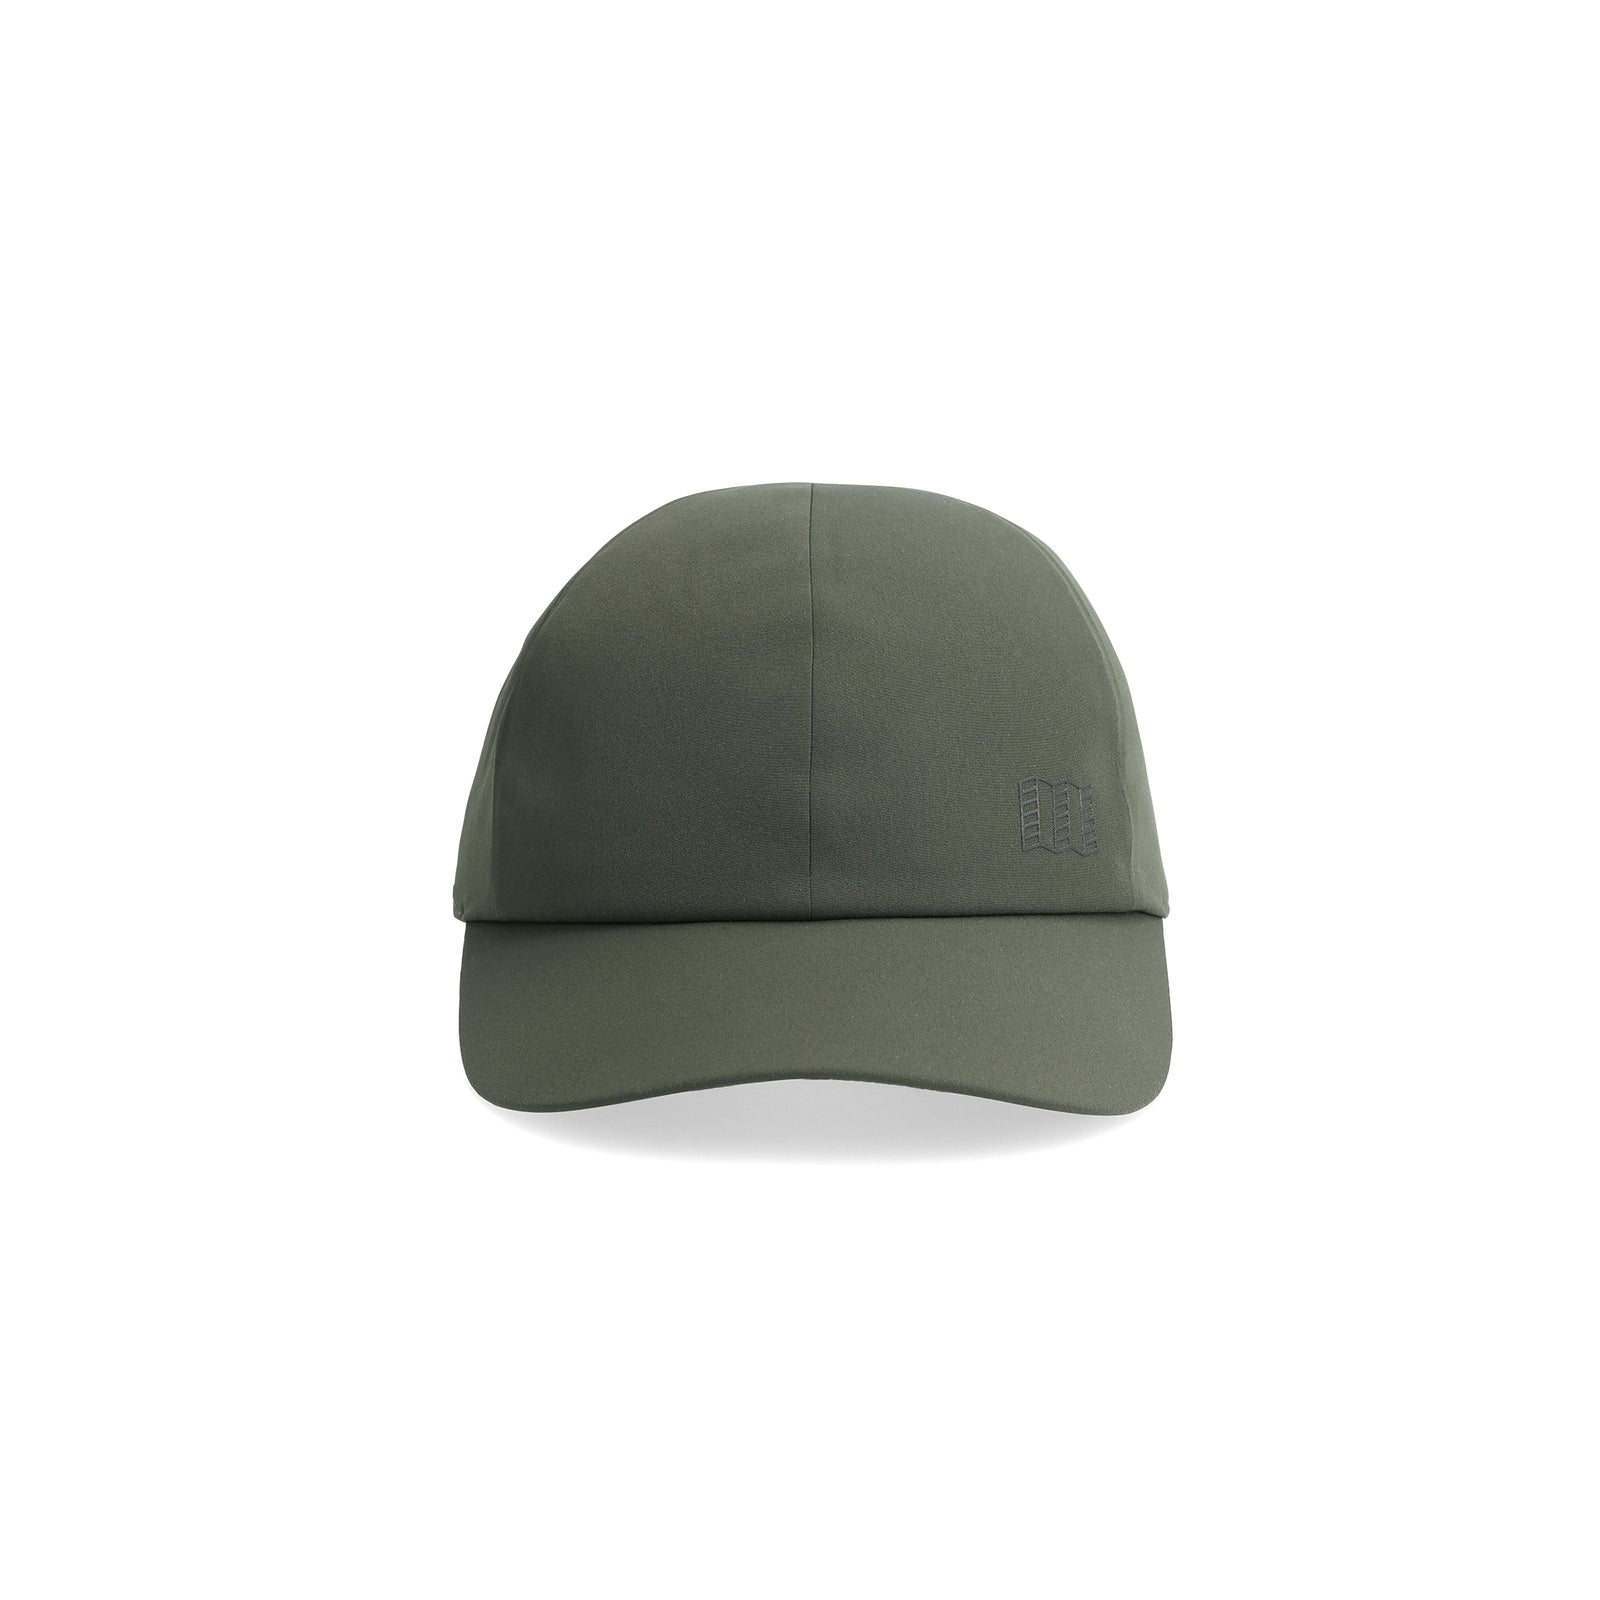 Front View of Topo Designs Global Tech Cap in "Olive"